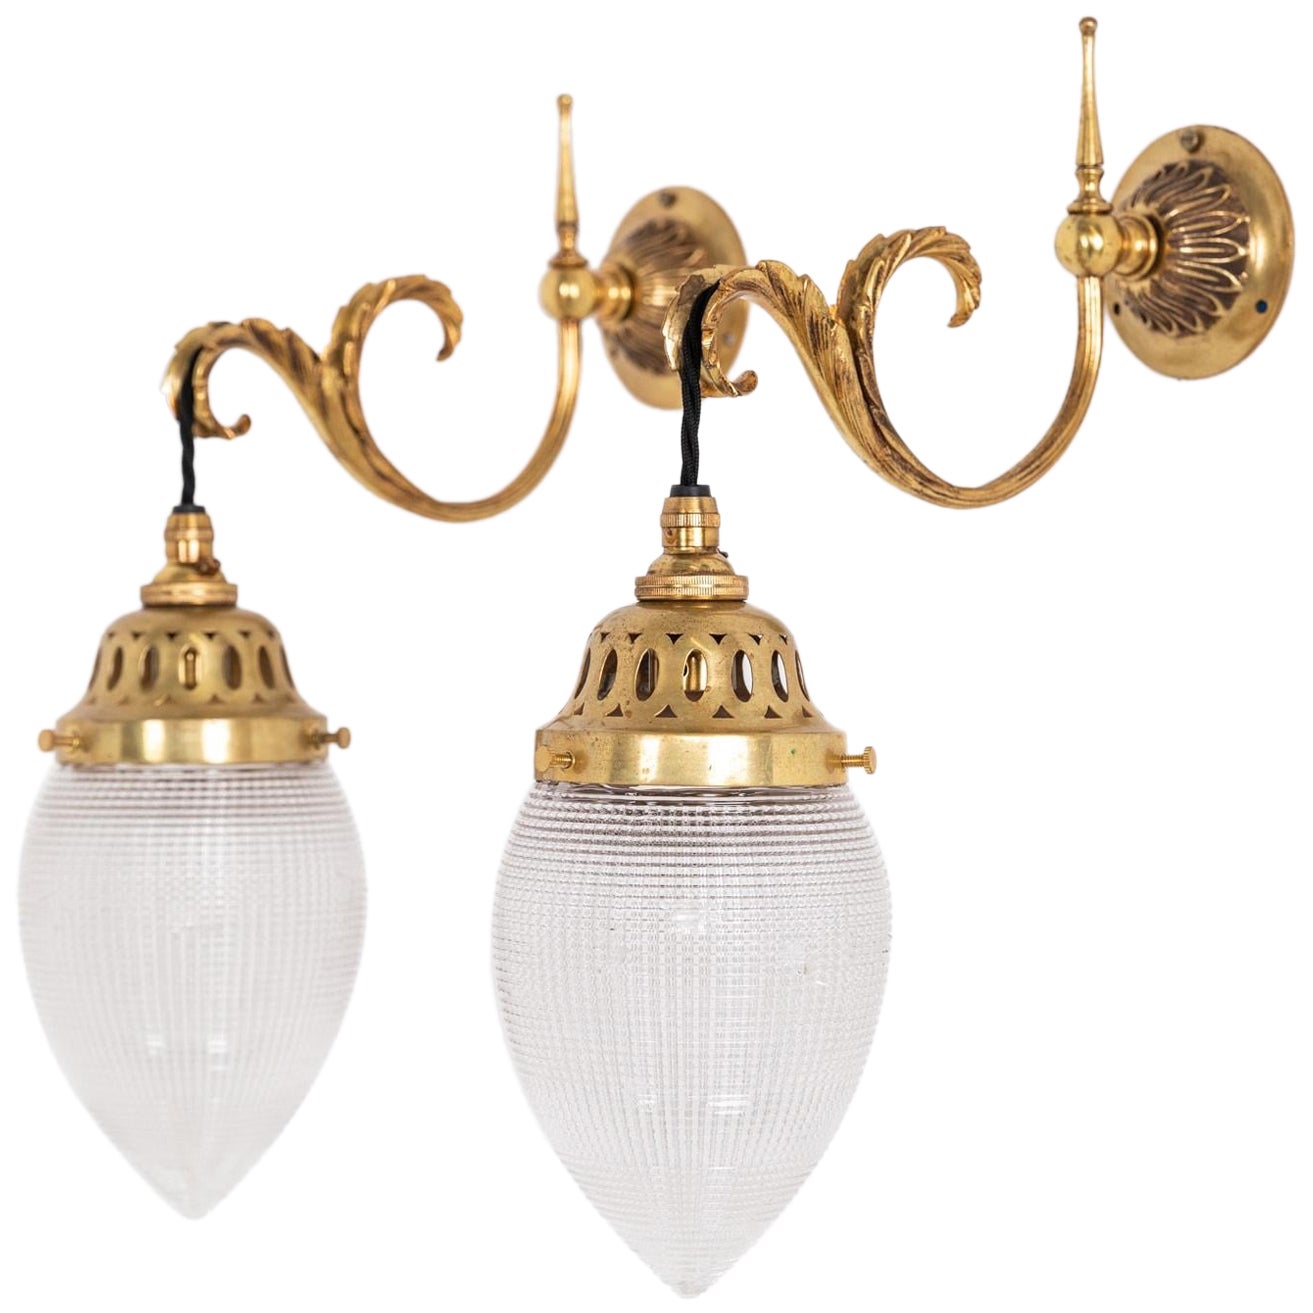 Pair of Antique Brass Osler / Holophane Wall Lamp Sconce Lights, c.1920